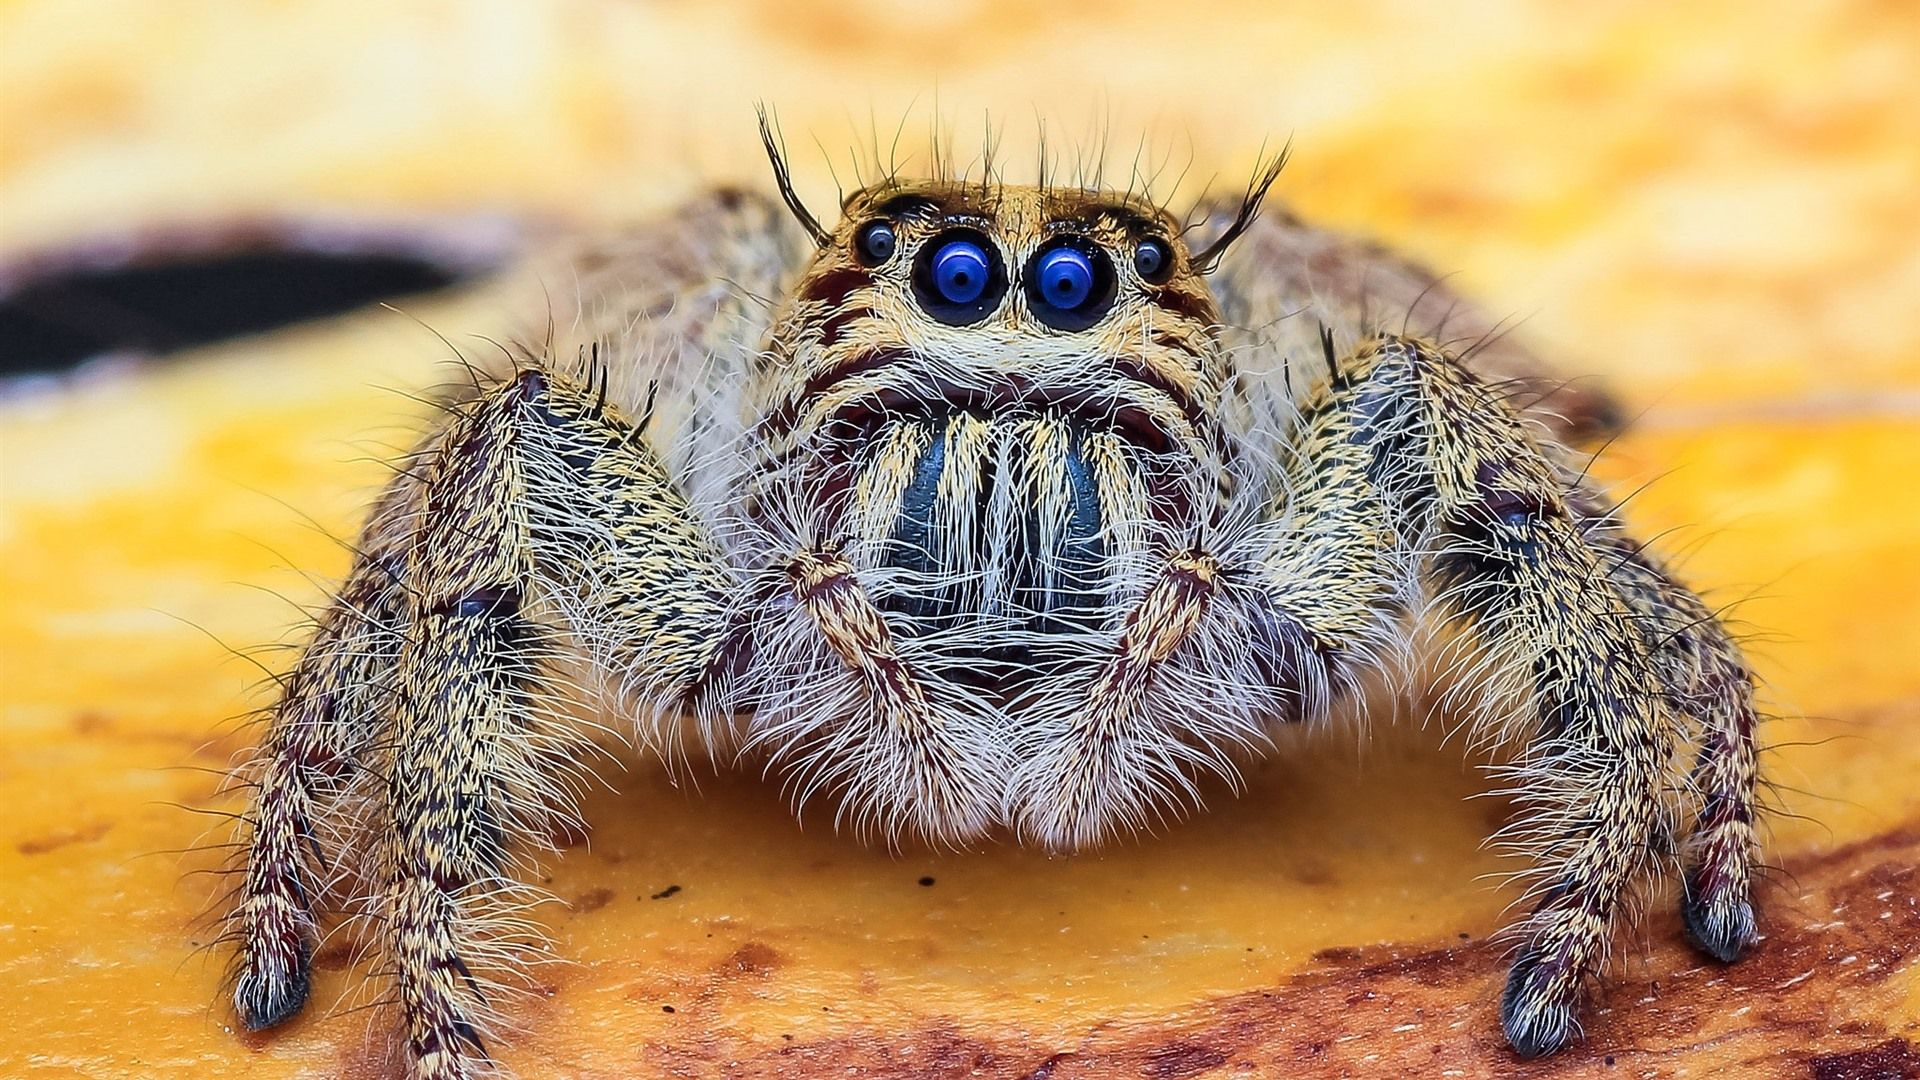 Wallpaper Blue eyes spider, insect 1920x1440 HD Picture, Image